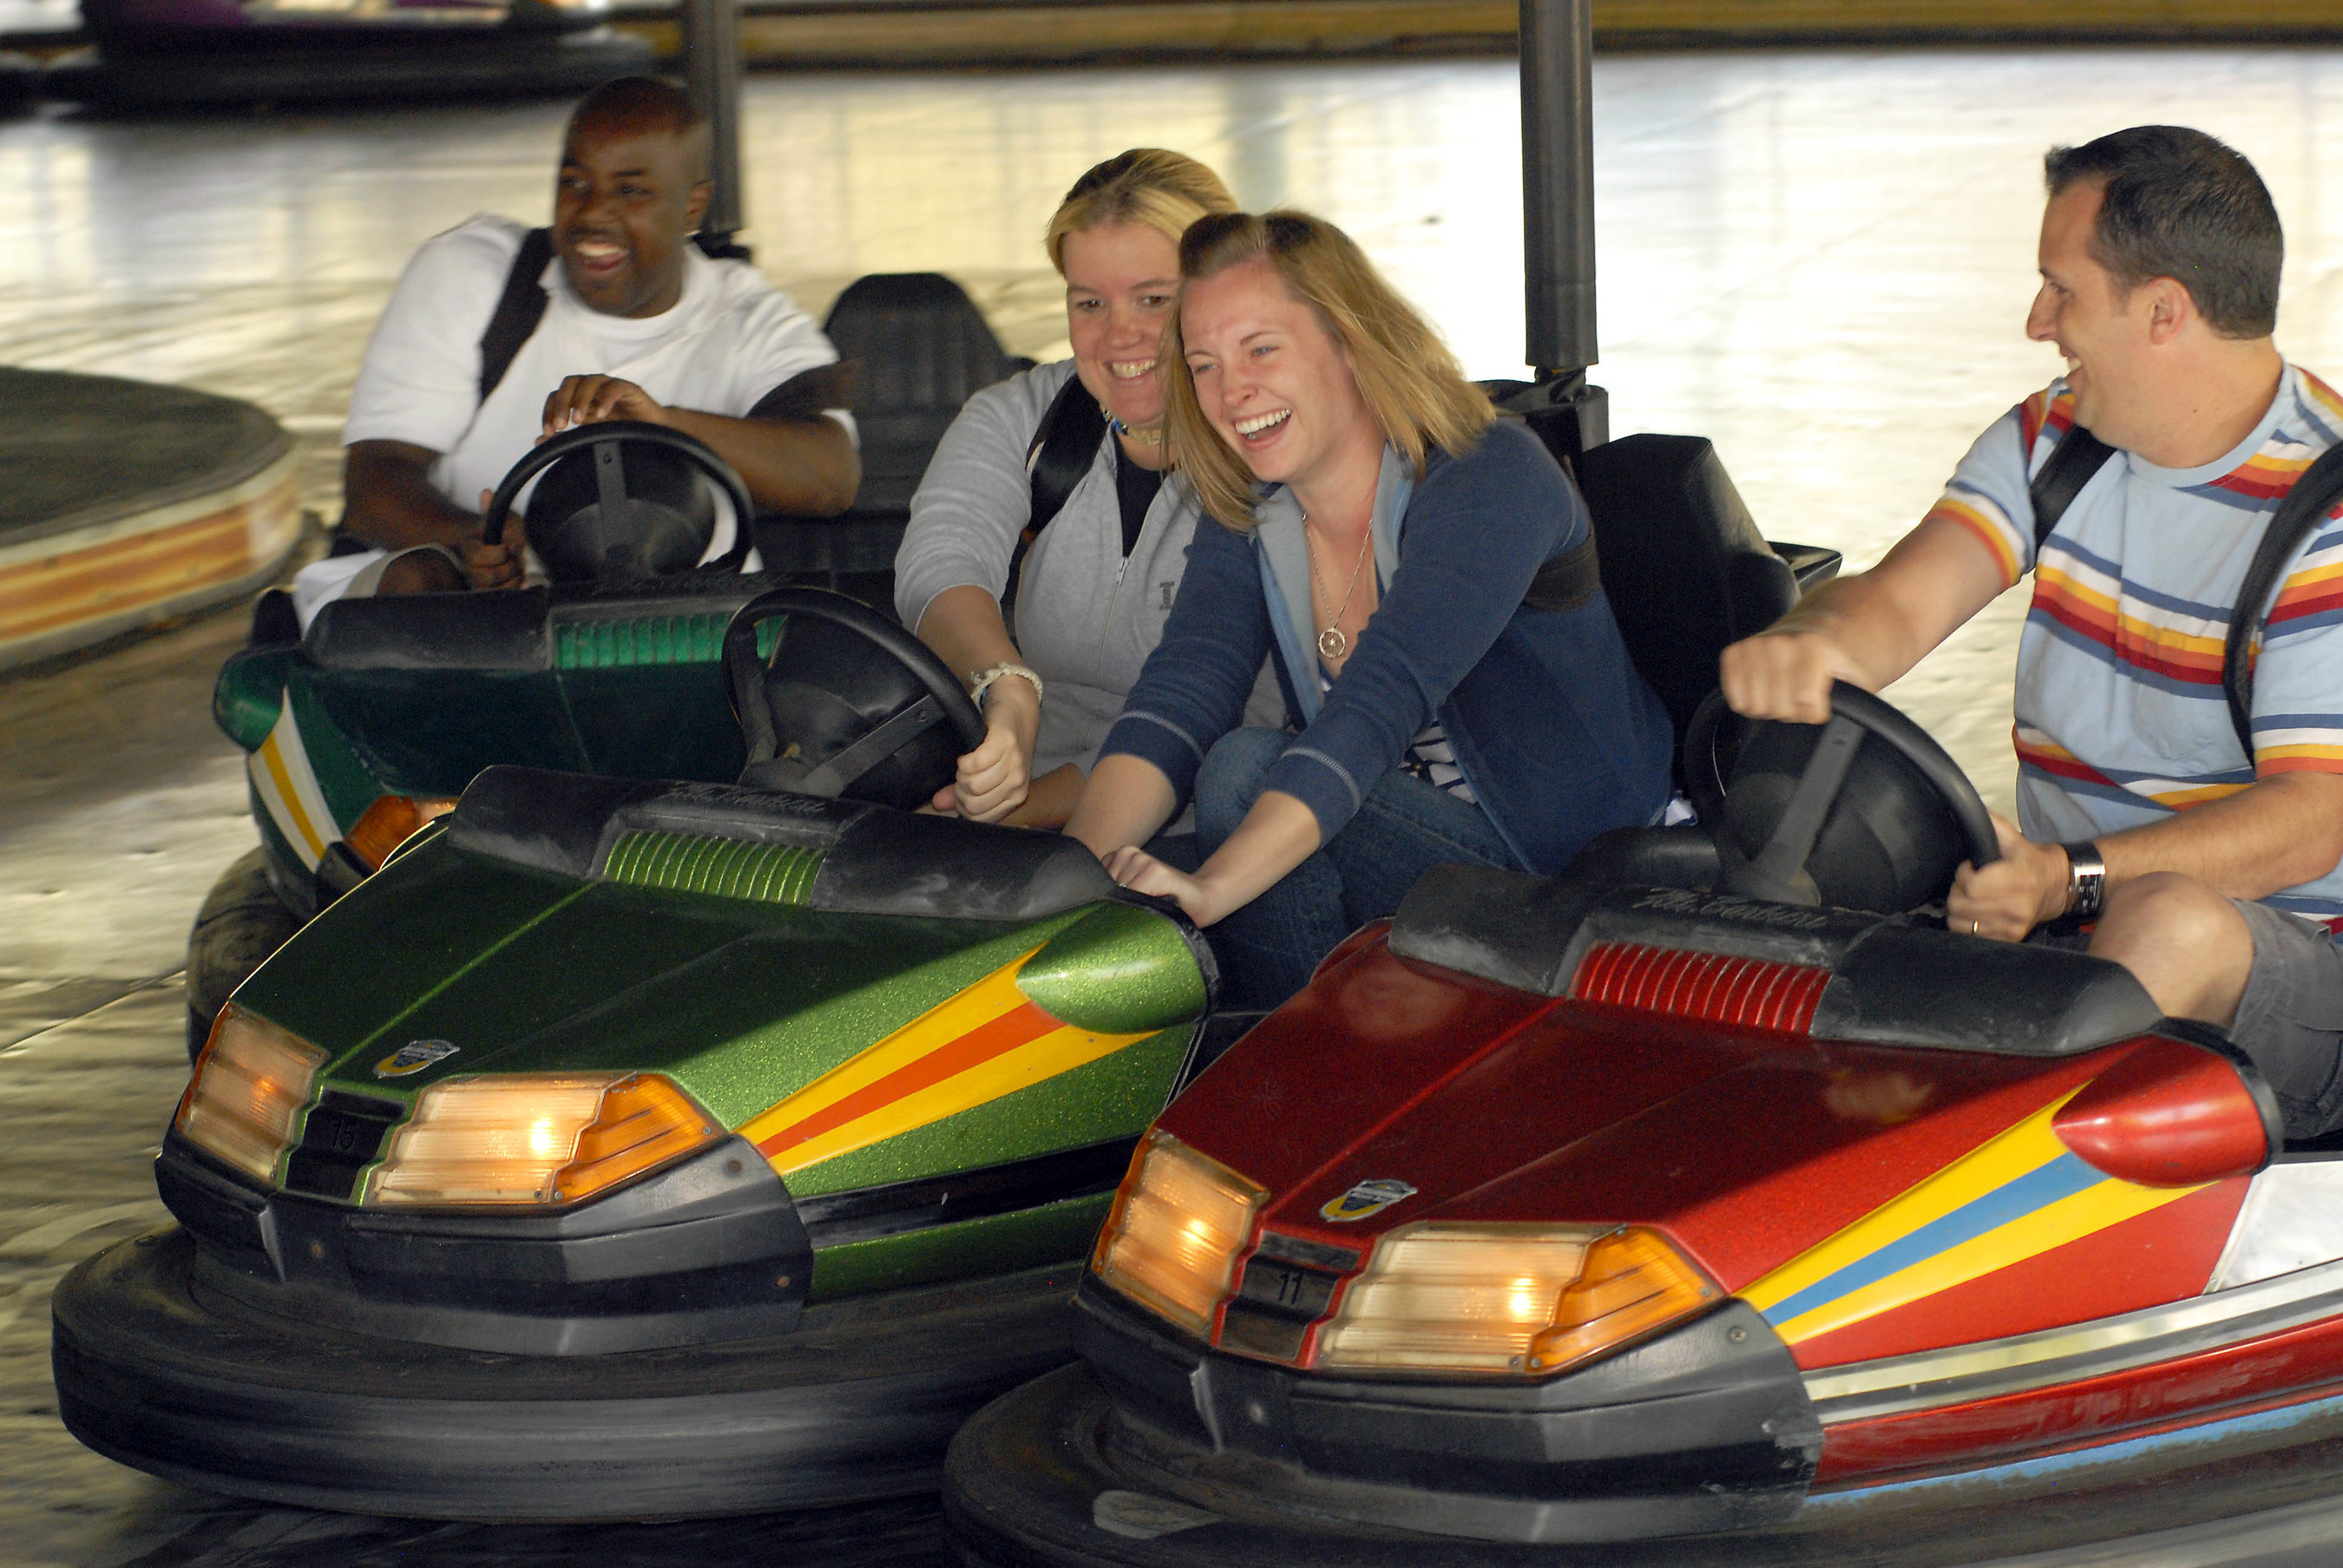 Back by the popular demand of Dorney Park guests...bumper cars!  Just when you think you've got a clear path, BAM!--there's someone you didn't dodge. Get behind the wheel of this midway classic and take a crash course in family fun.